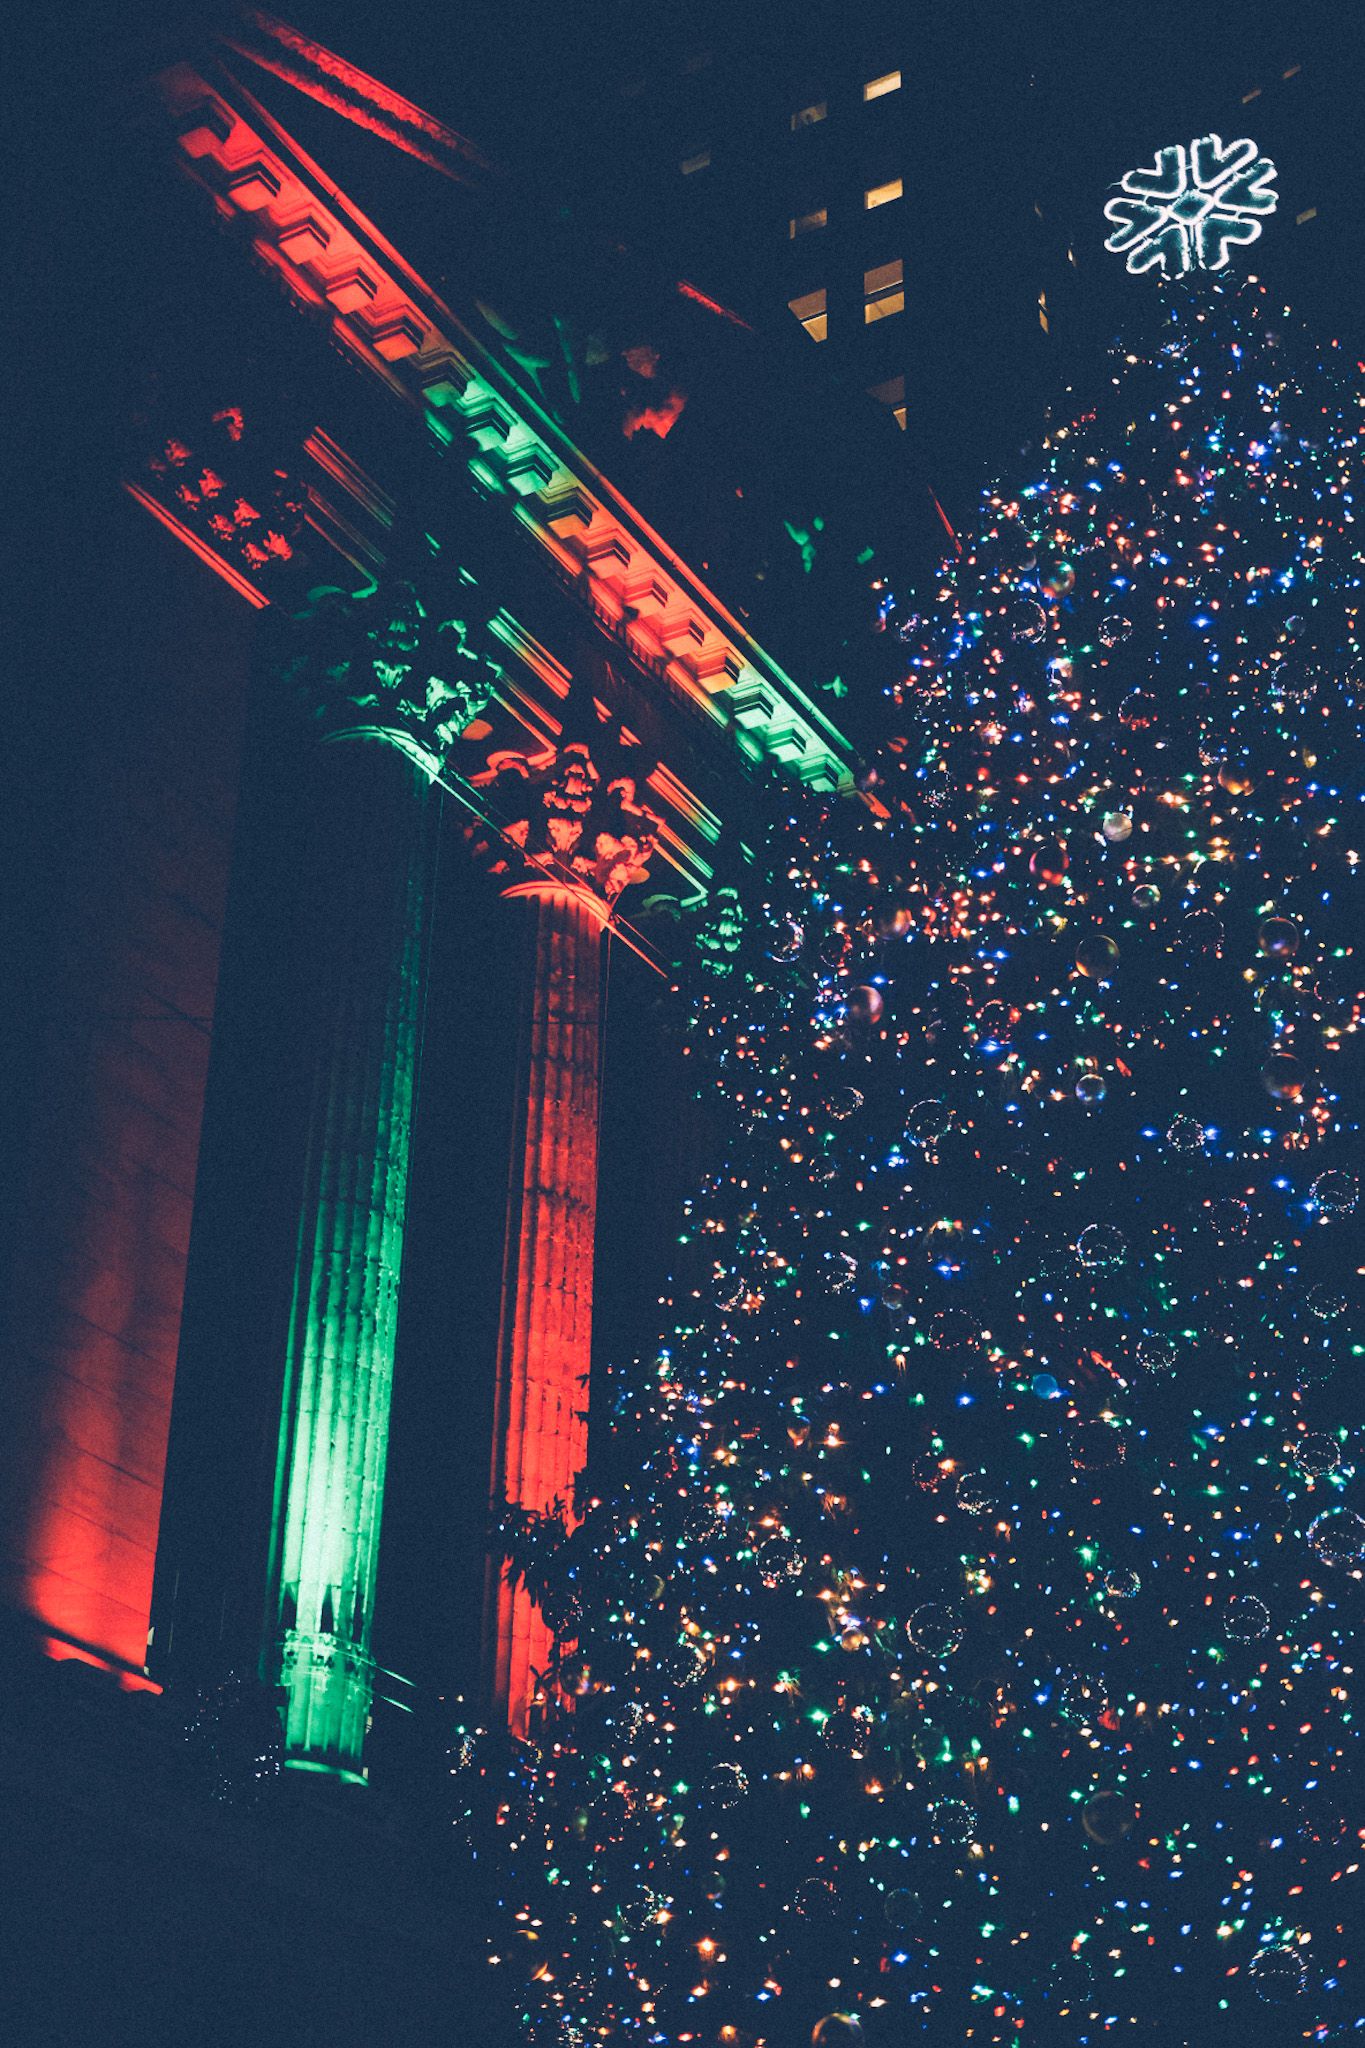 At night, a giant lit Christmas tree with a star on top of it stands in front of a building with Roman pillars, lit in green and red.